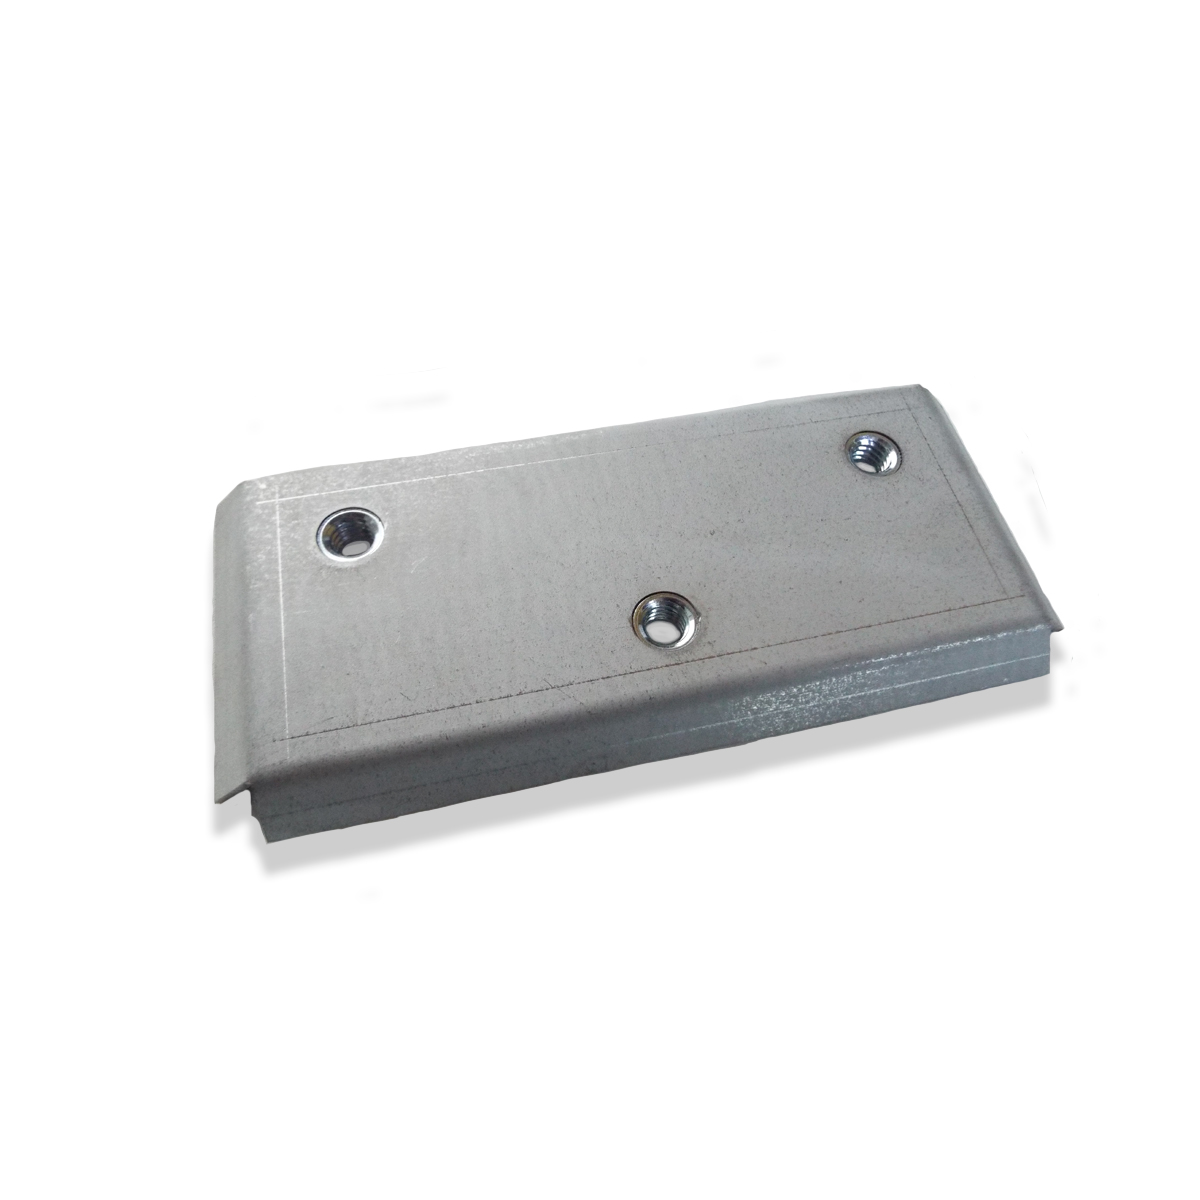 1967-1970 Mirror Arm Securing Plate For MI143 And MI144 Standard Mirror Chevrolet and GMC Pickup Truck